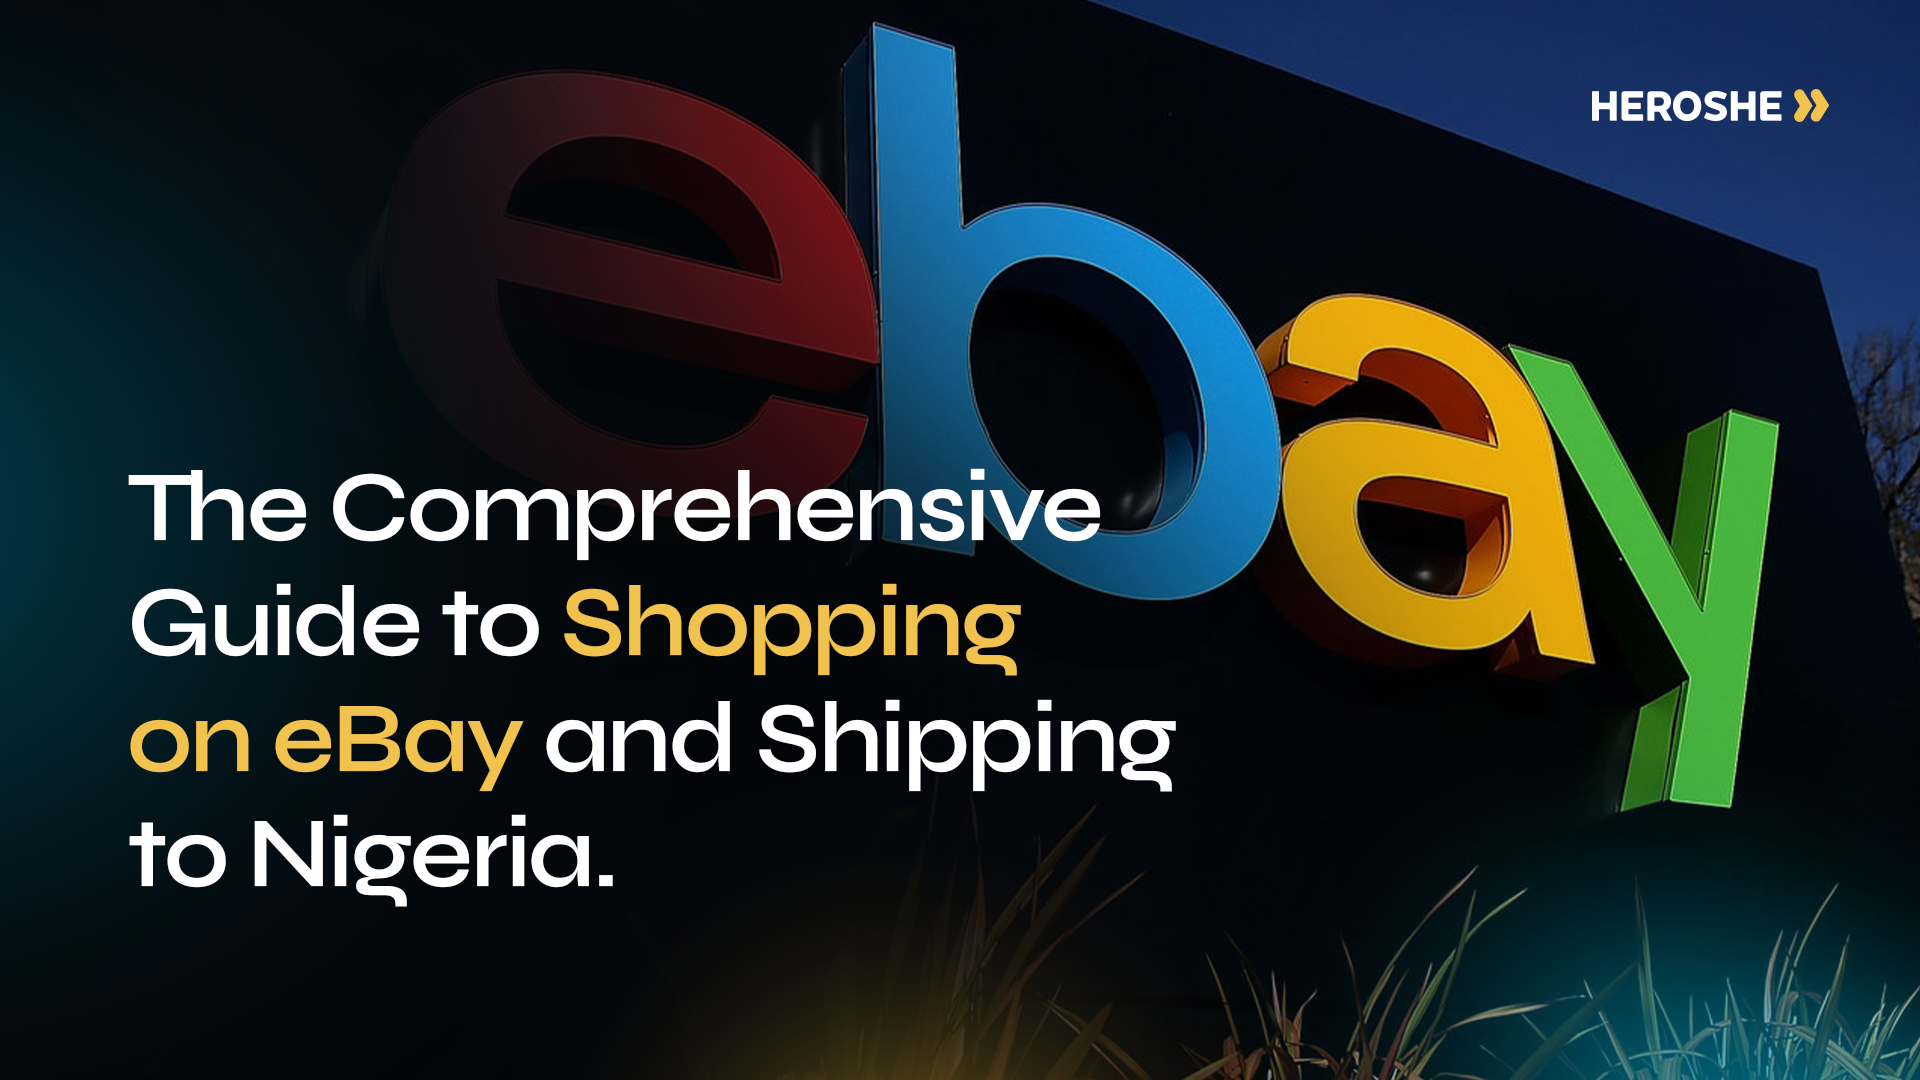 A Comprehensive Guide to Shopping on eBay and Shipping to Nigeria